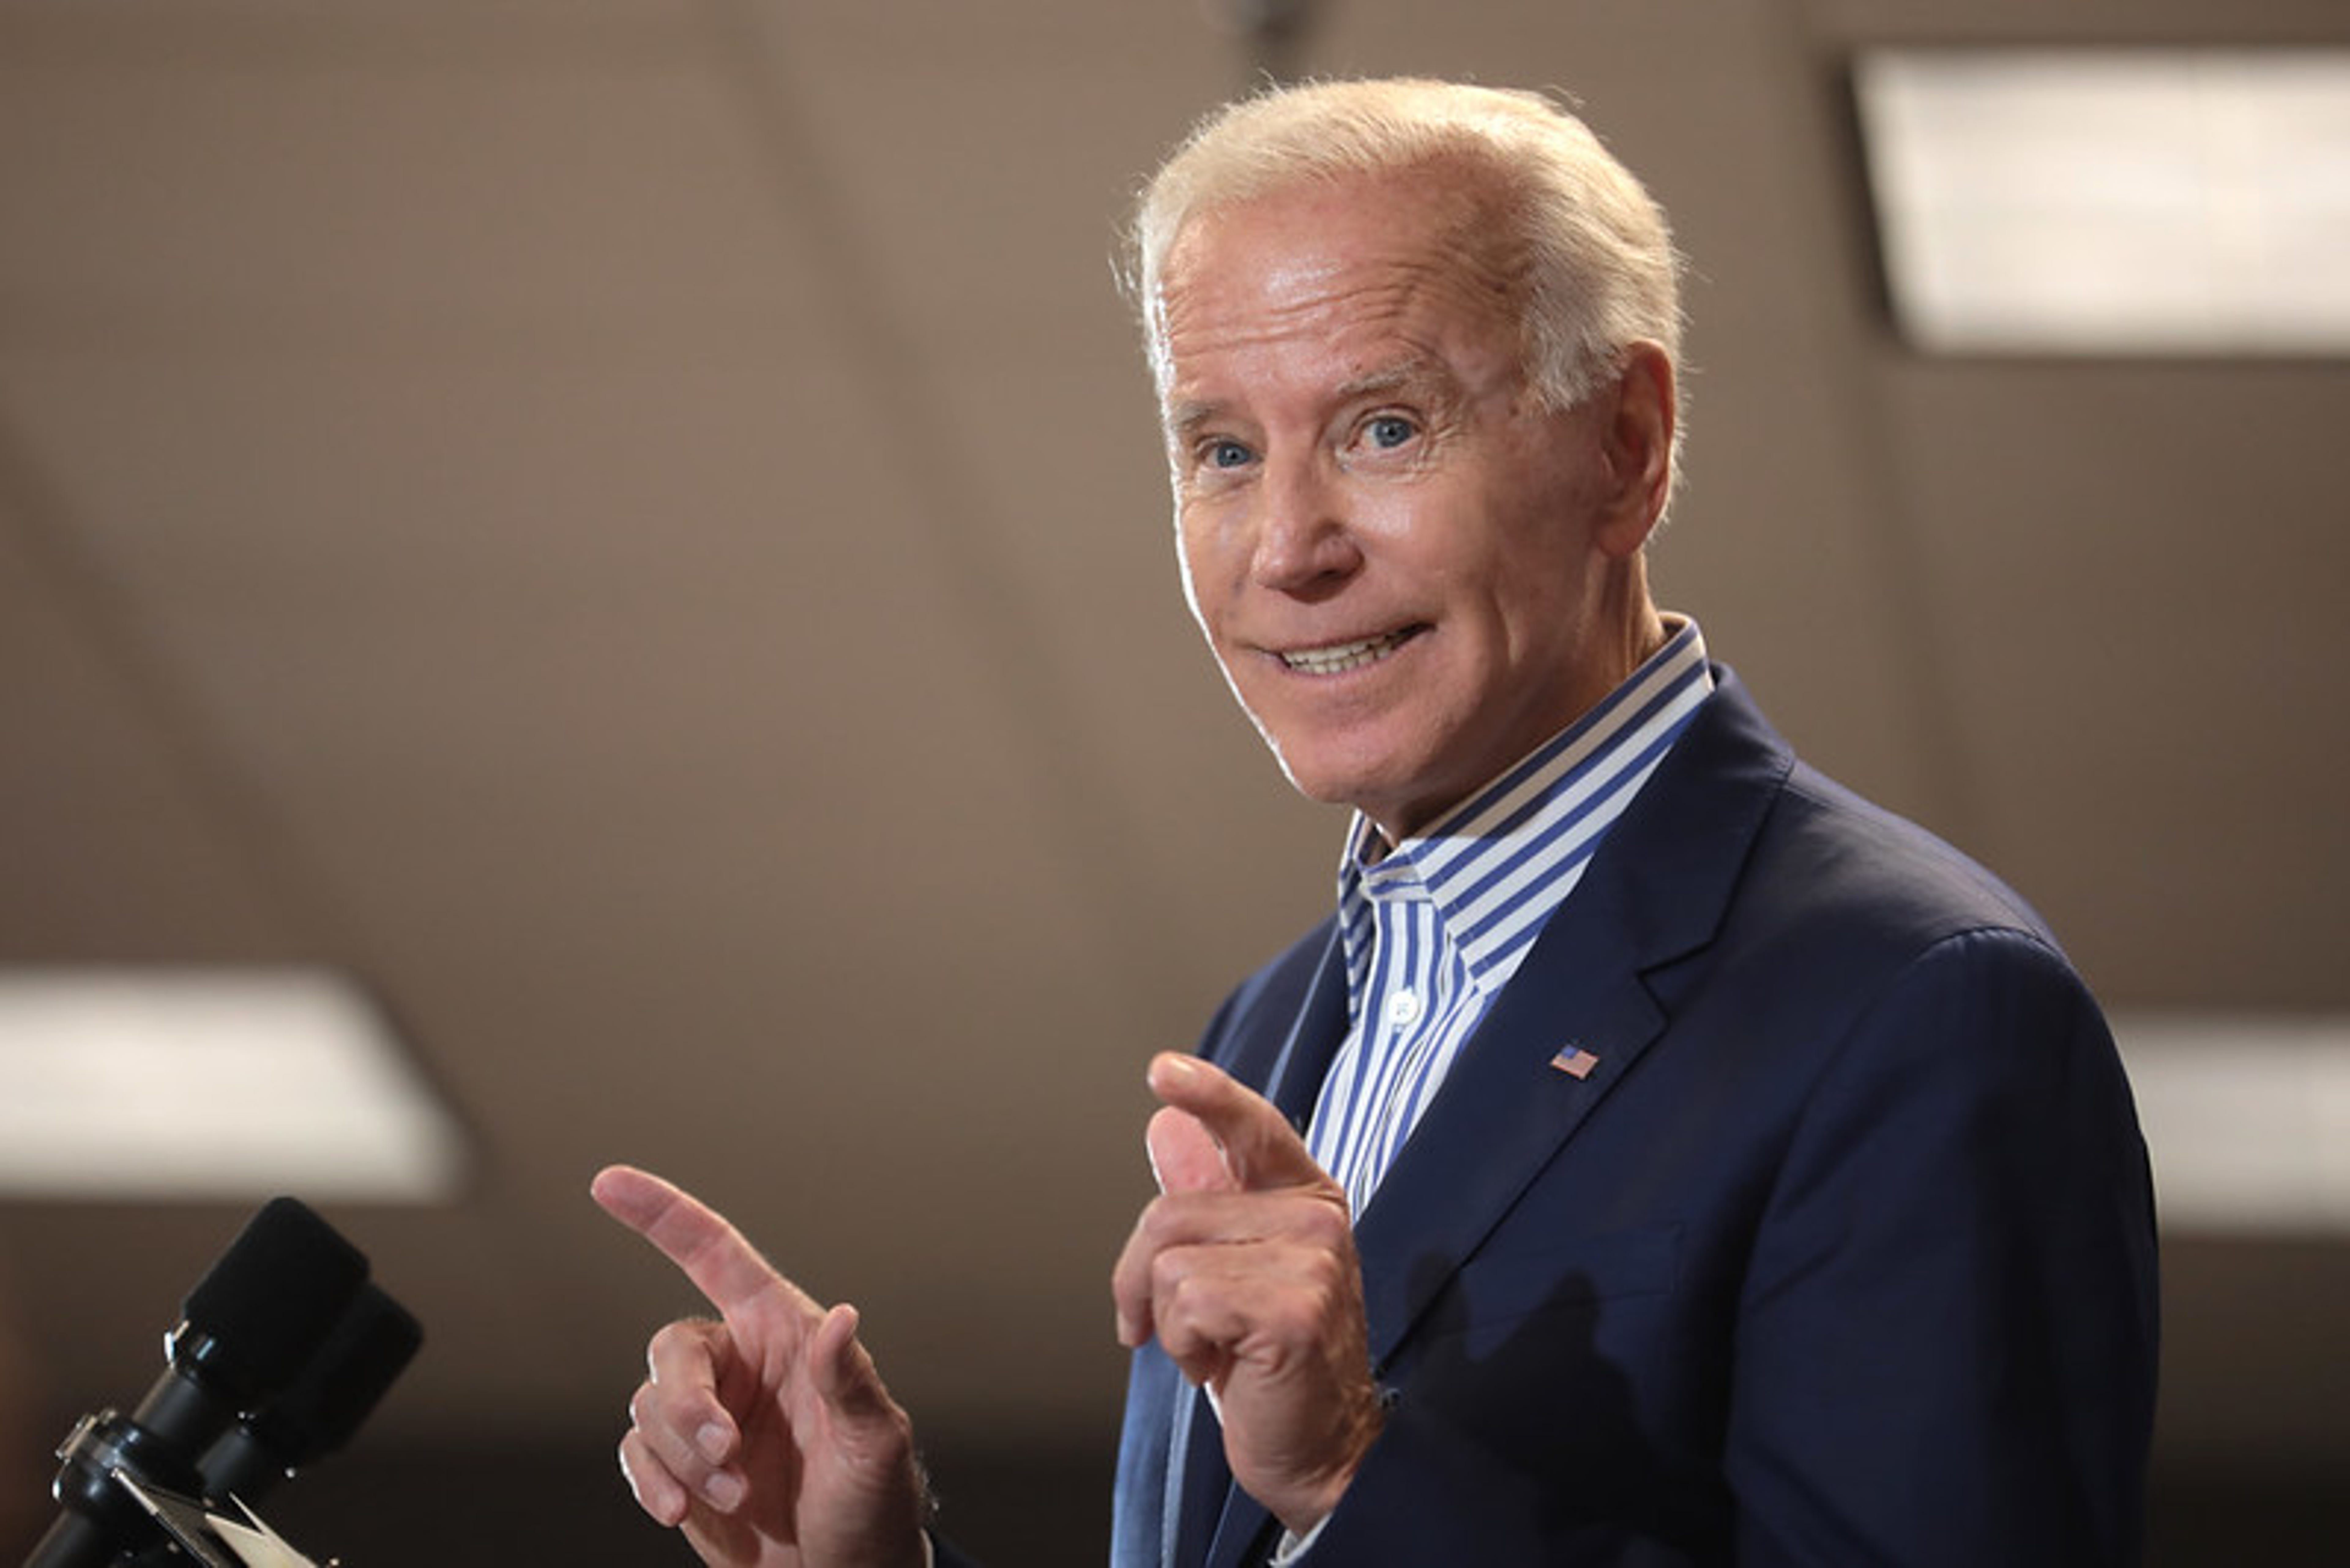 White House Confirms Biden Will Seek Re-Election In 2024